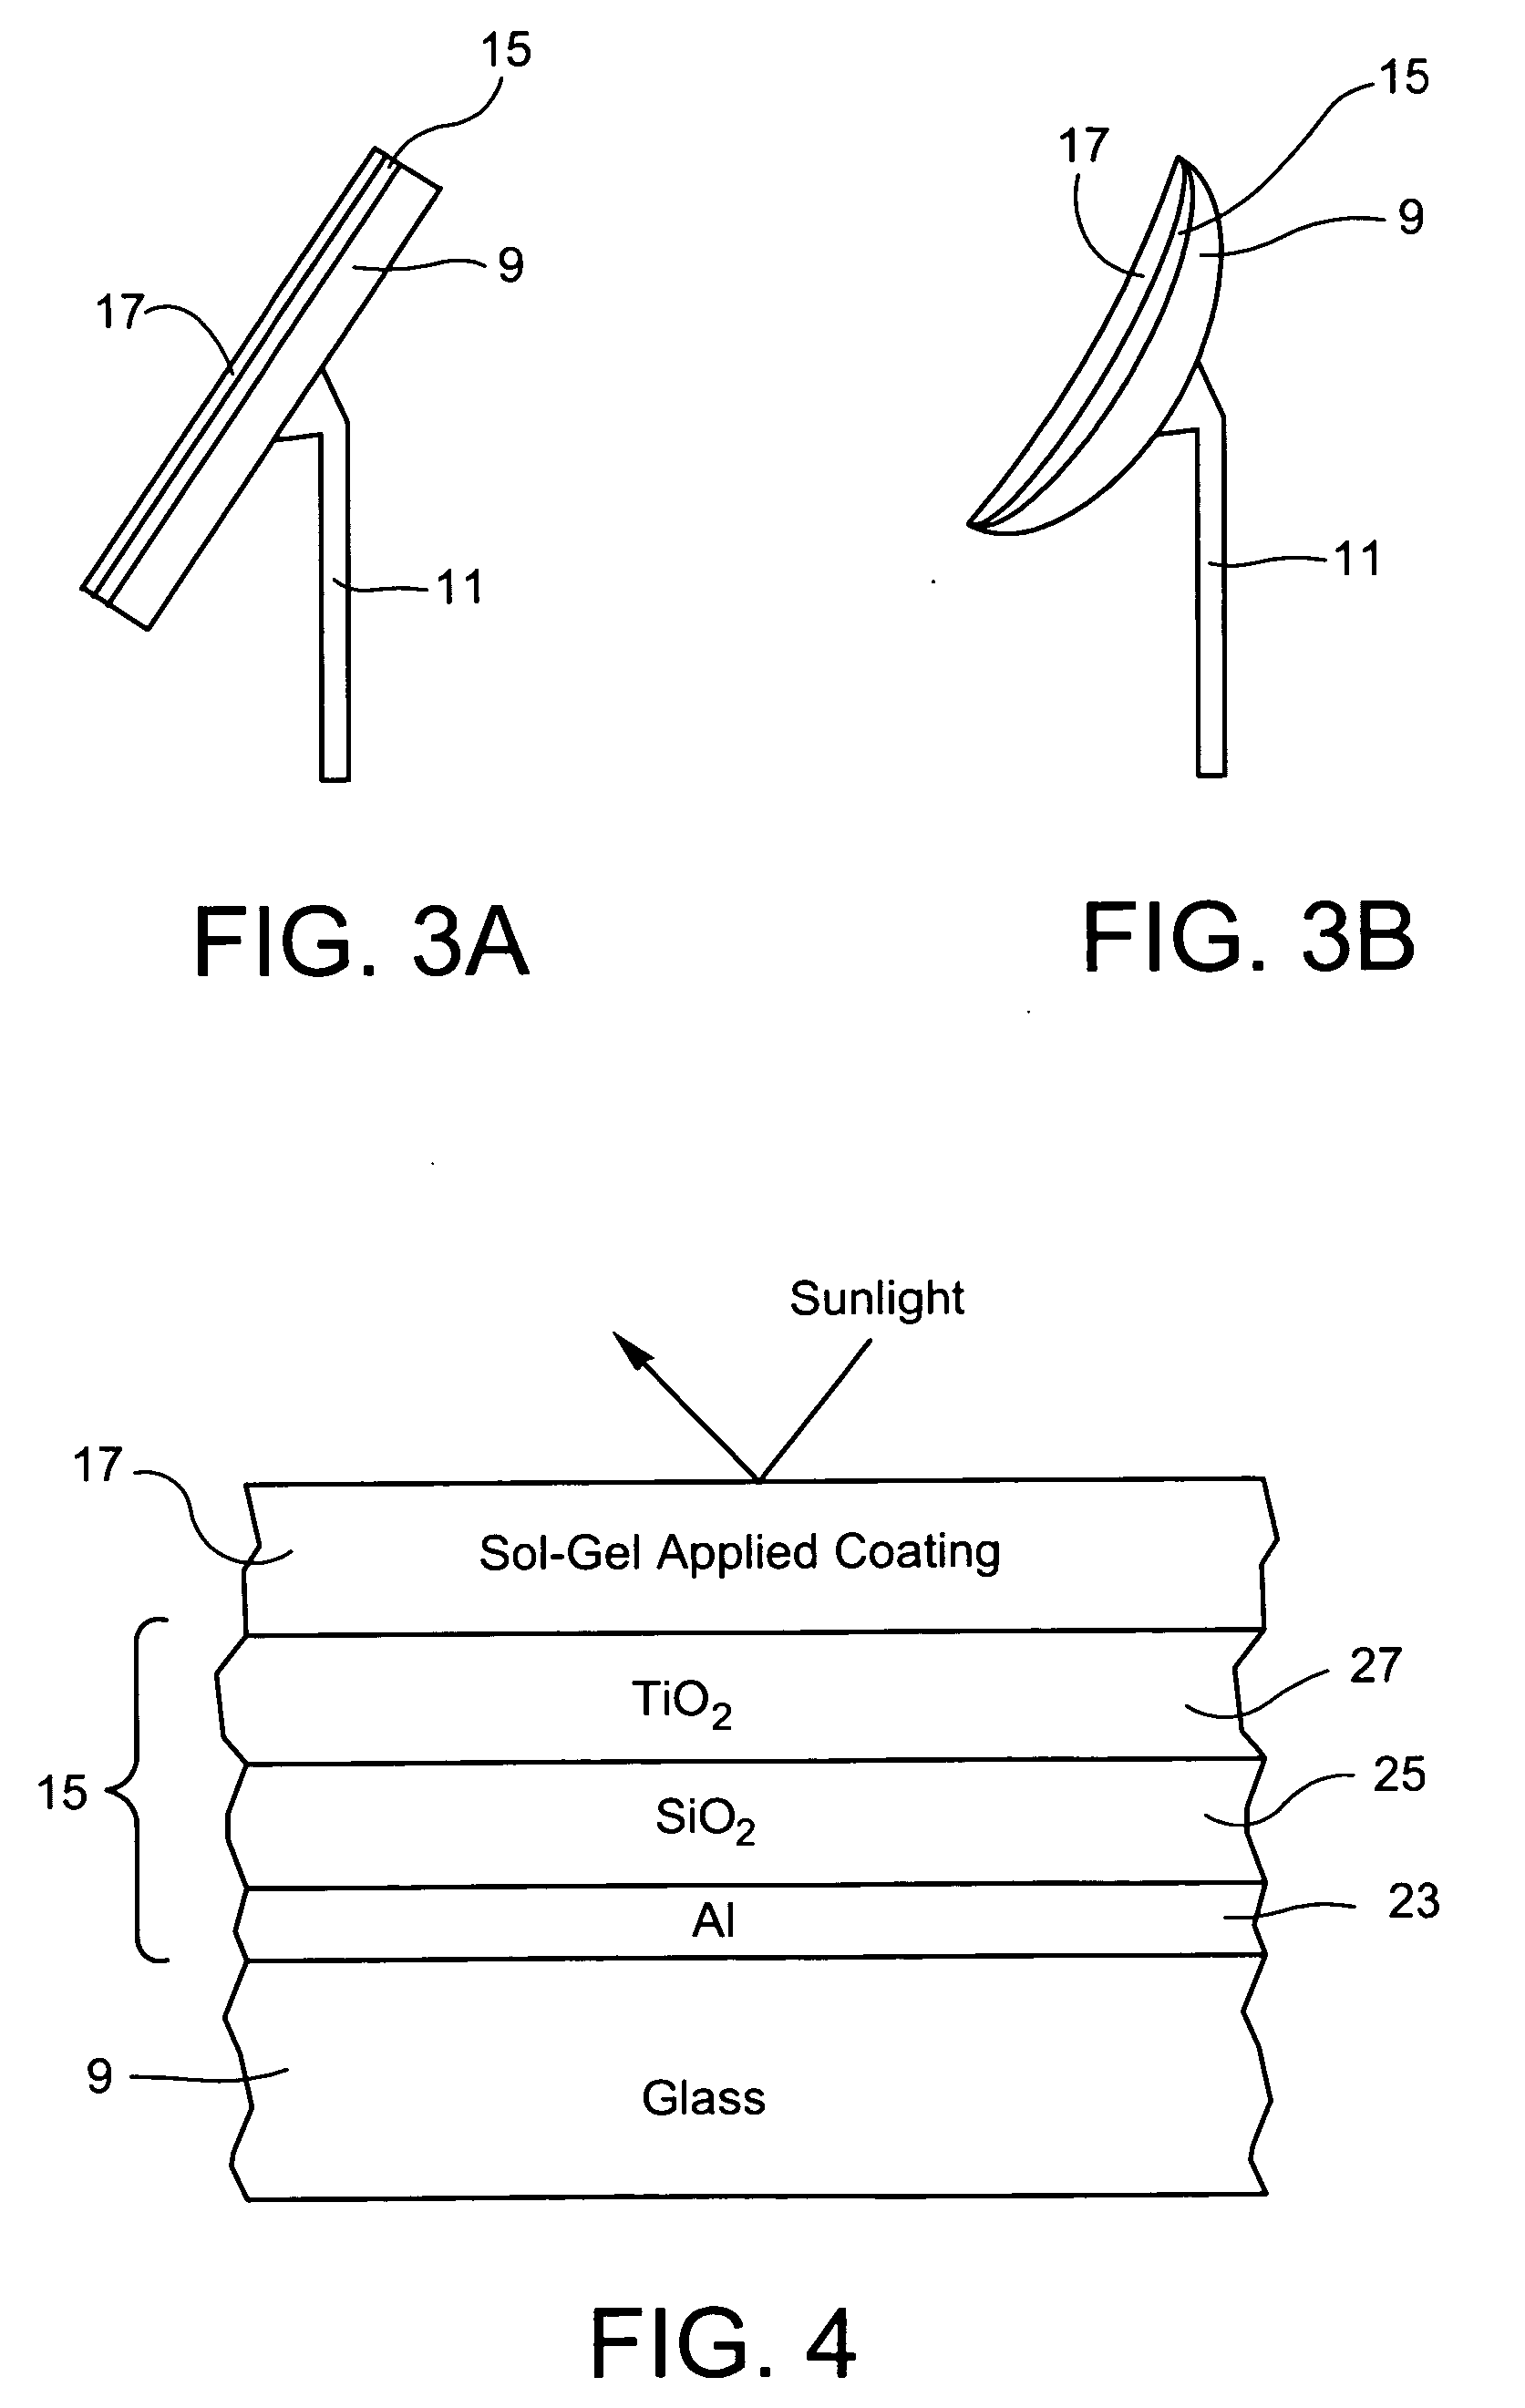 First surface mirror with sol-gel applied protective coating for use in solar collector or the like